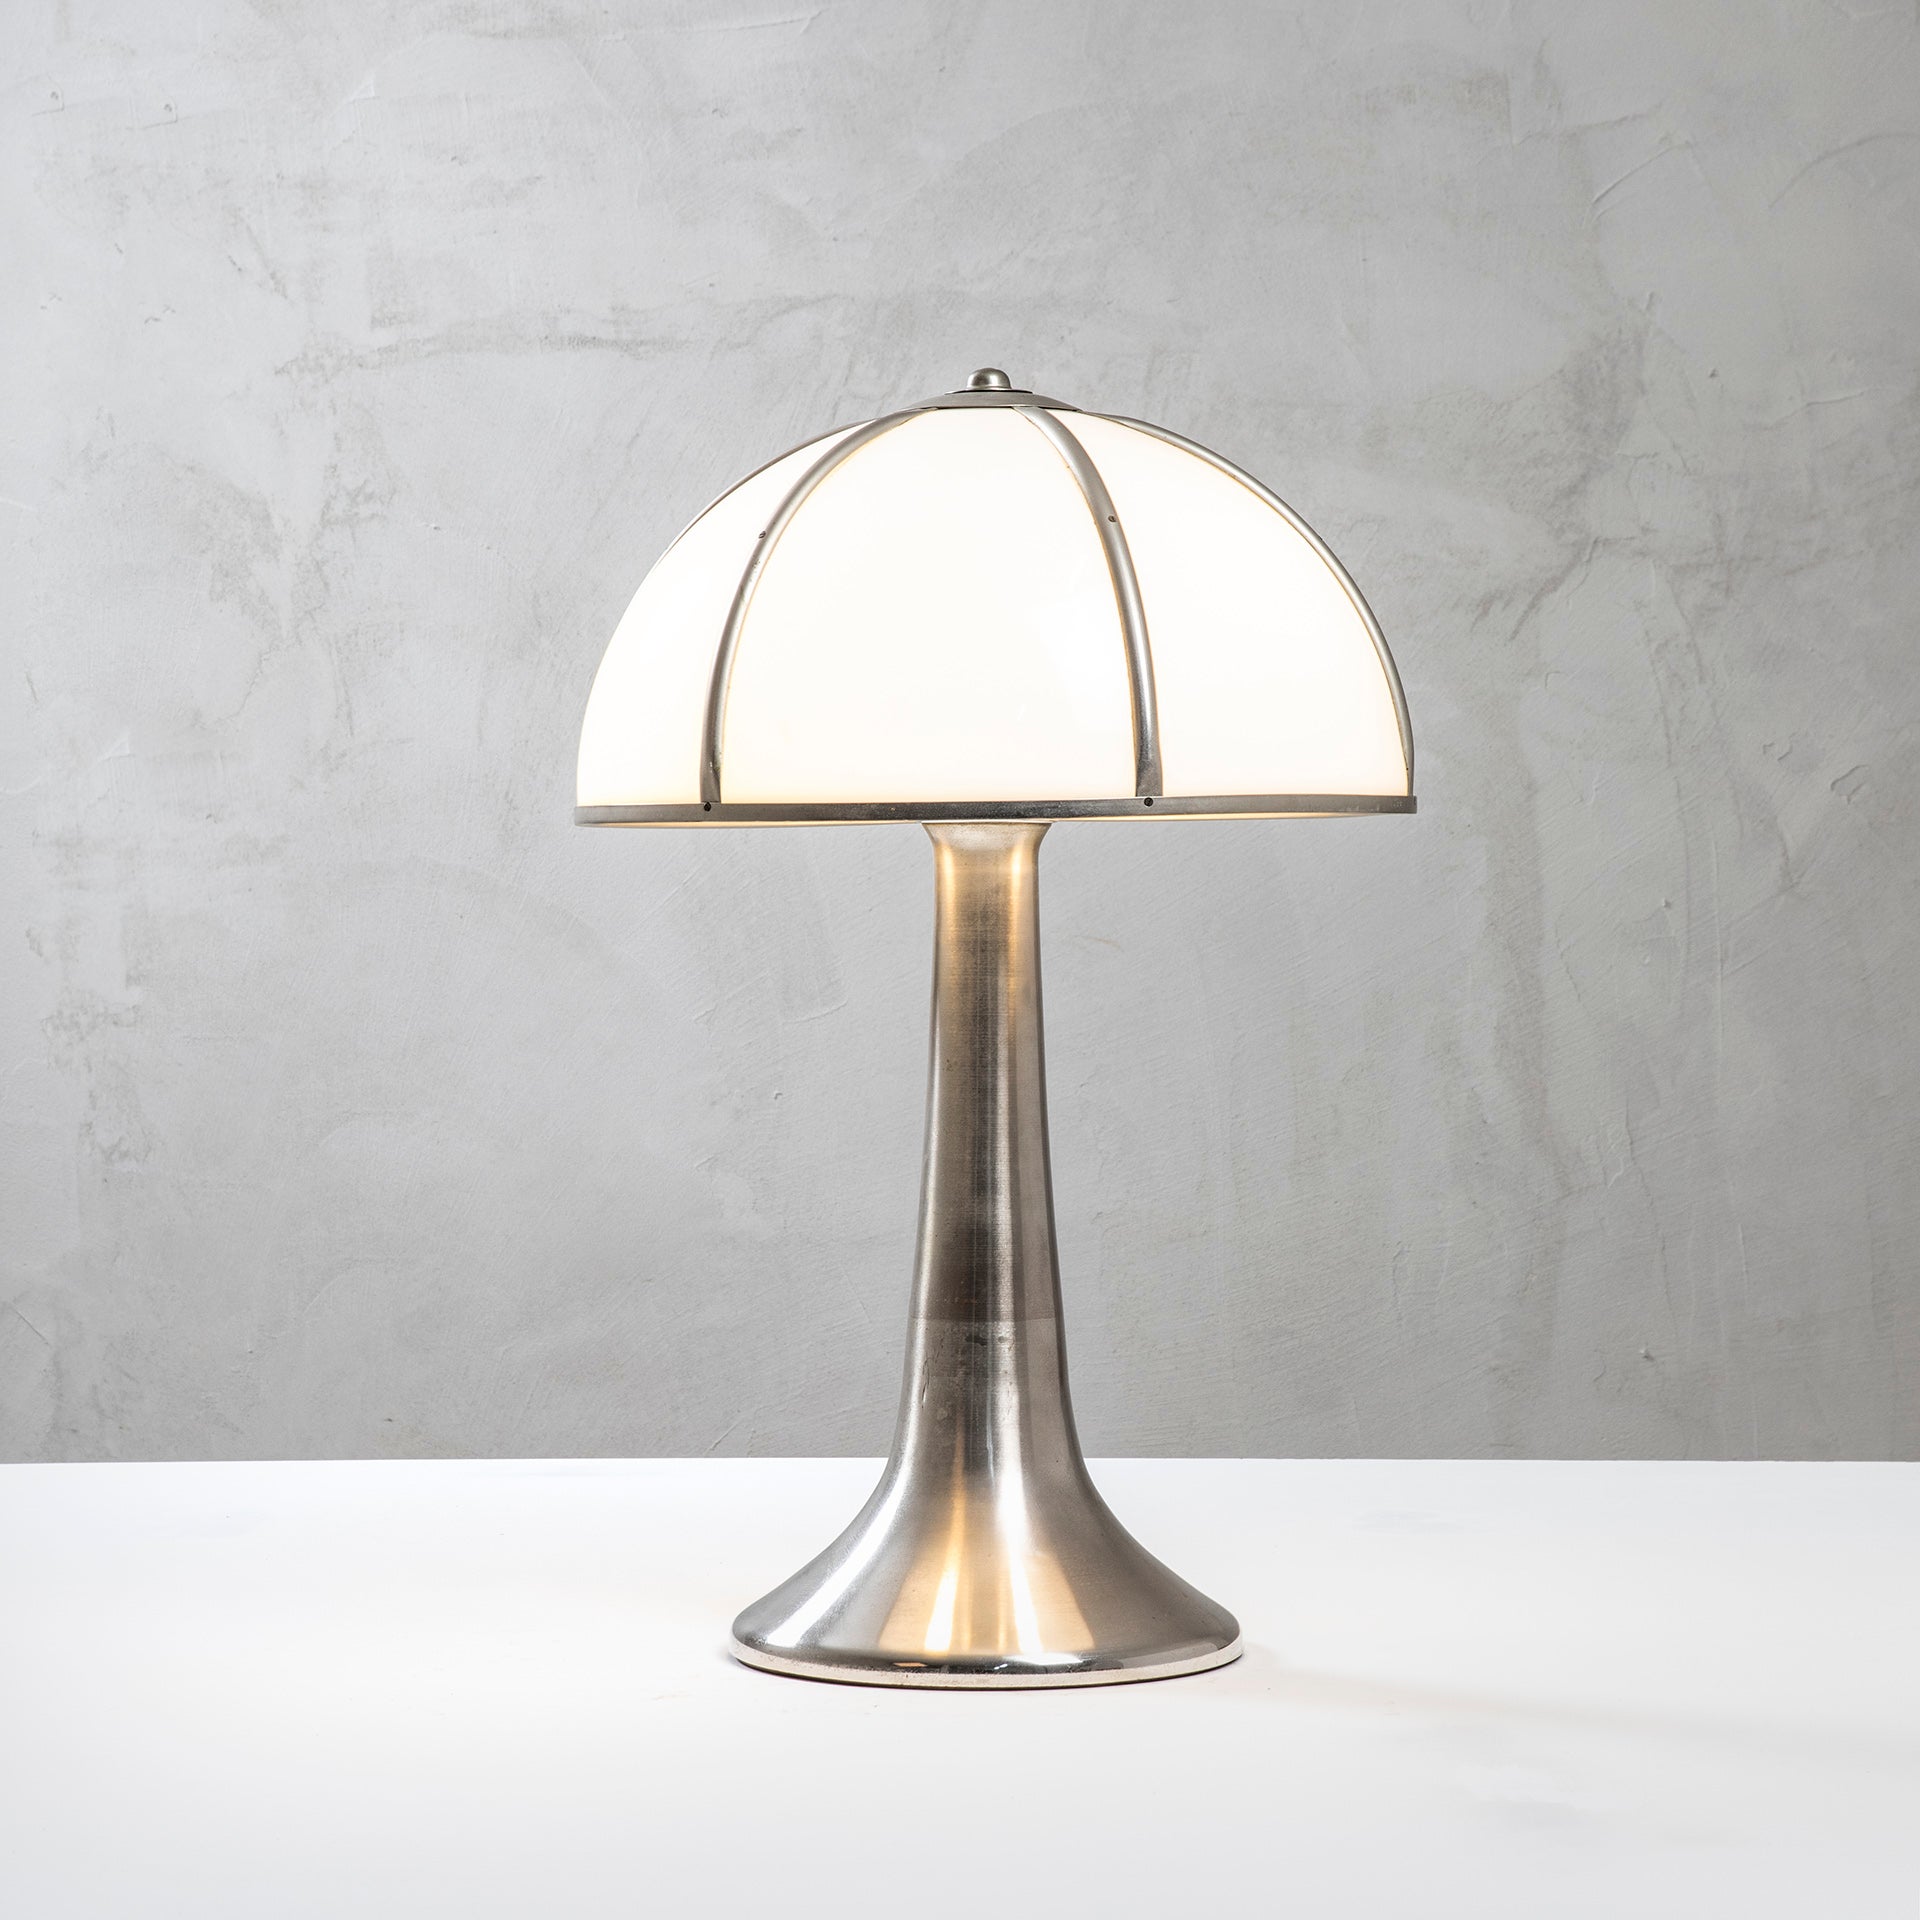 20th Century Gabriella Crespi Table Lamp Fungo in Nickelplated Brass and Perspex